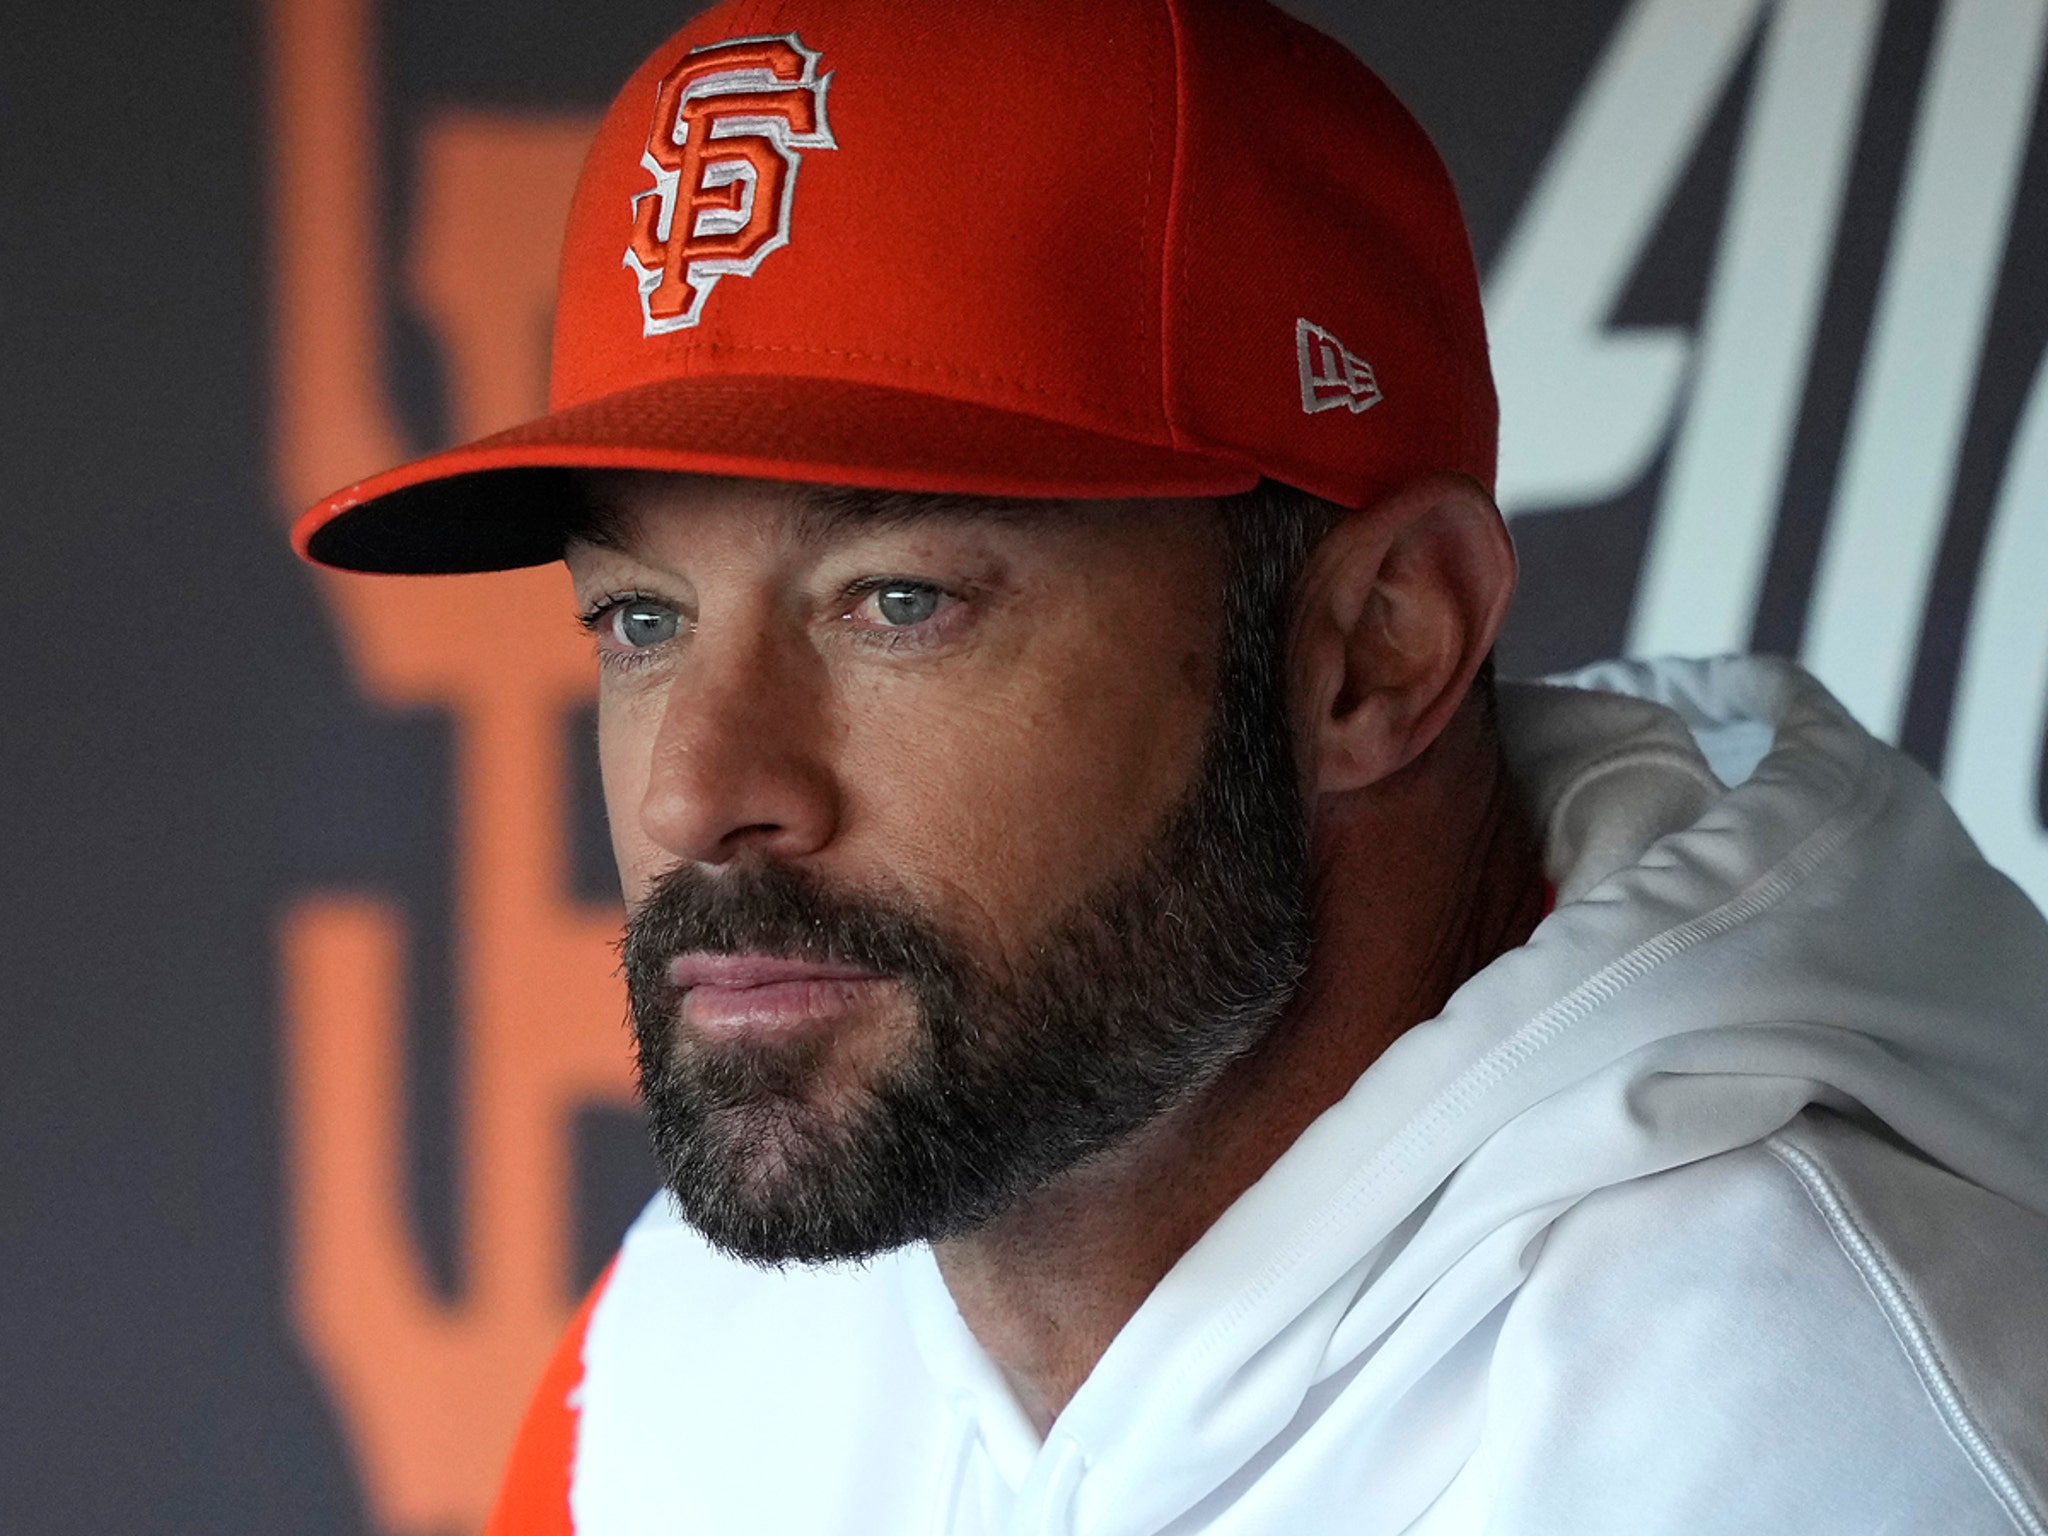 Former SF Giants Manager Gabe Kapler Interviewed by Boston Red Sox